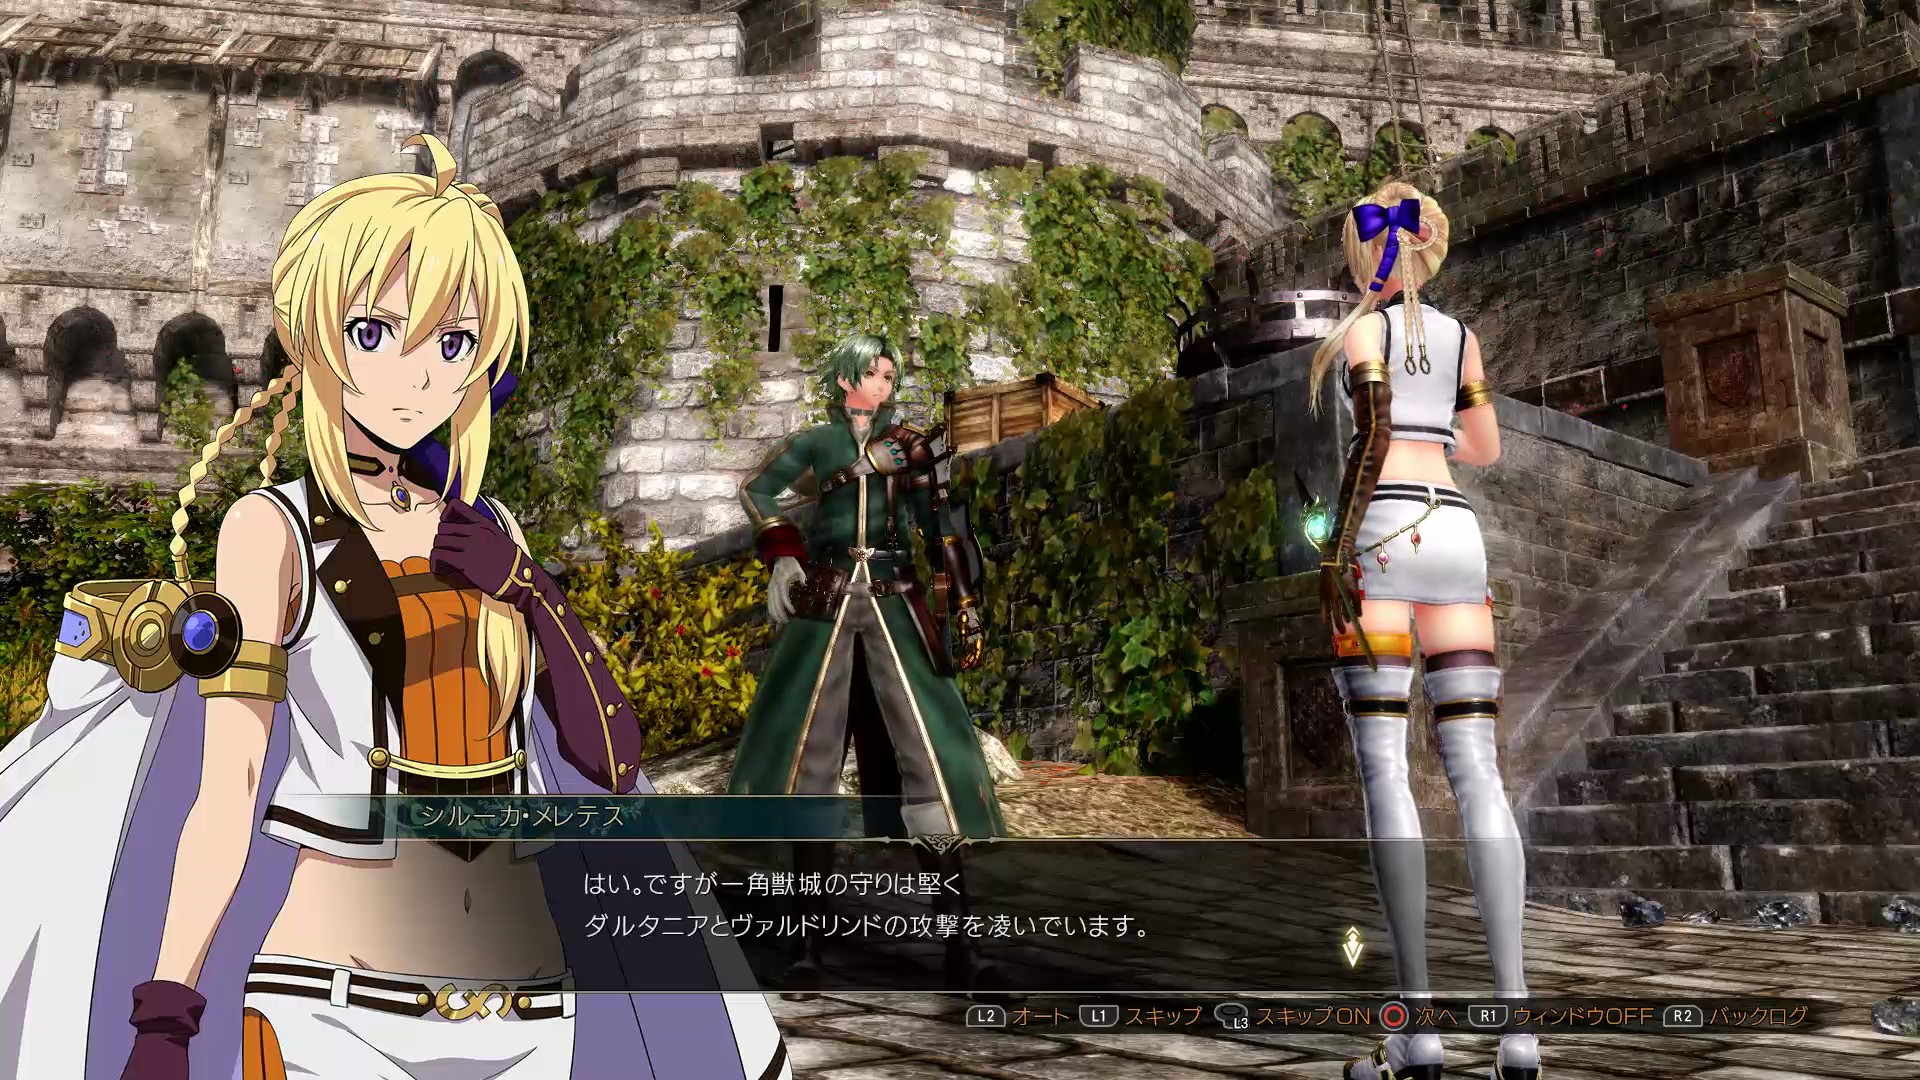 Record of Grancrest War announced for PS4 - Gematsu